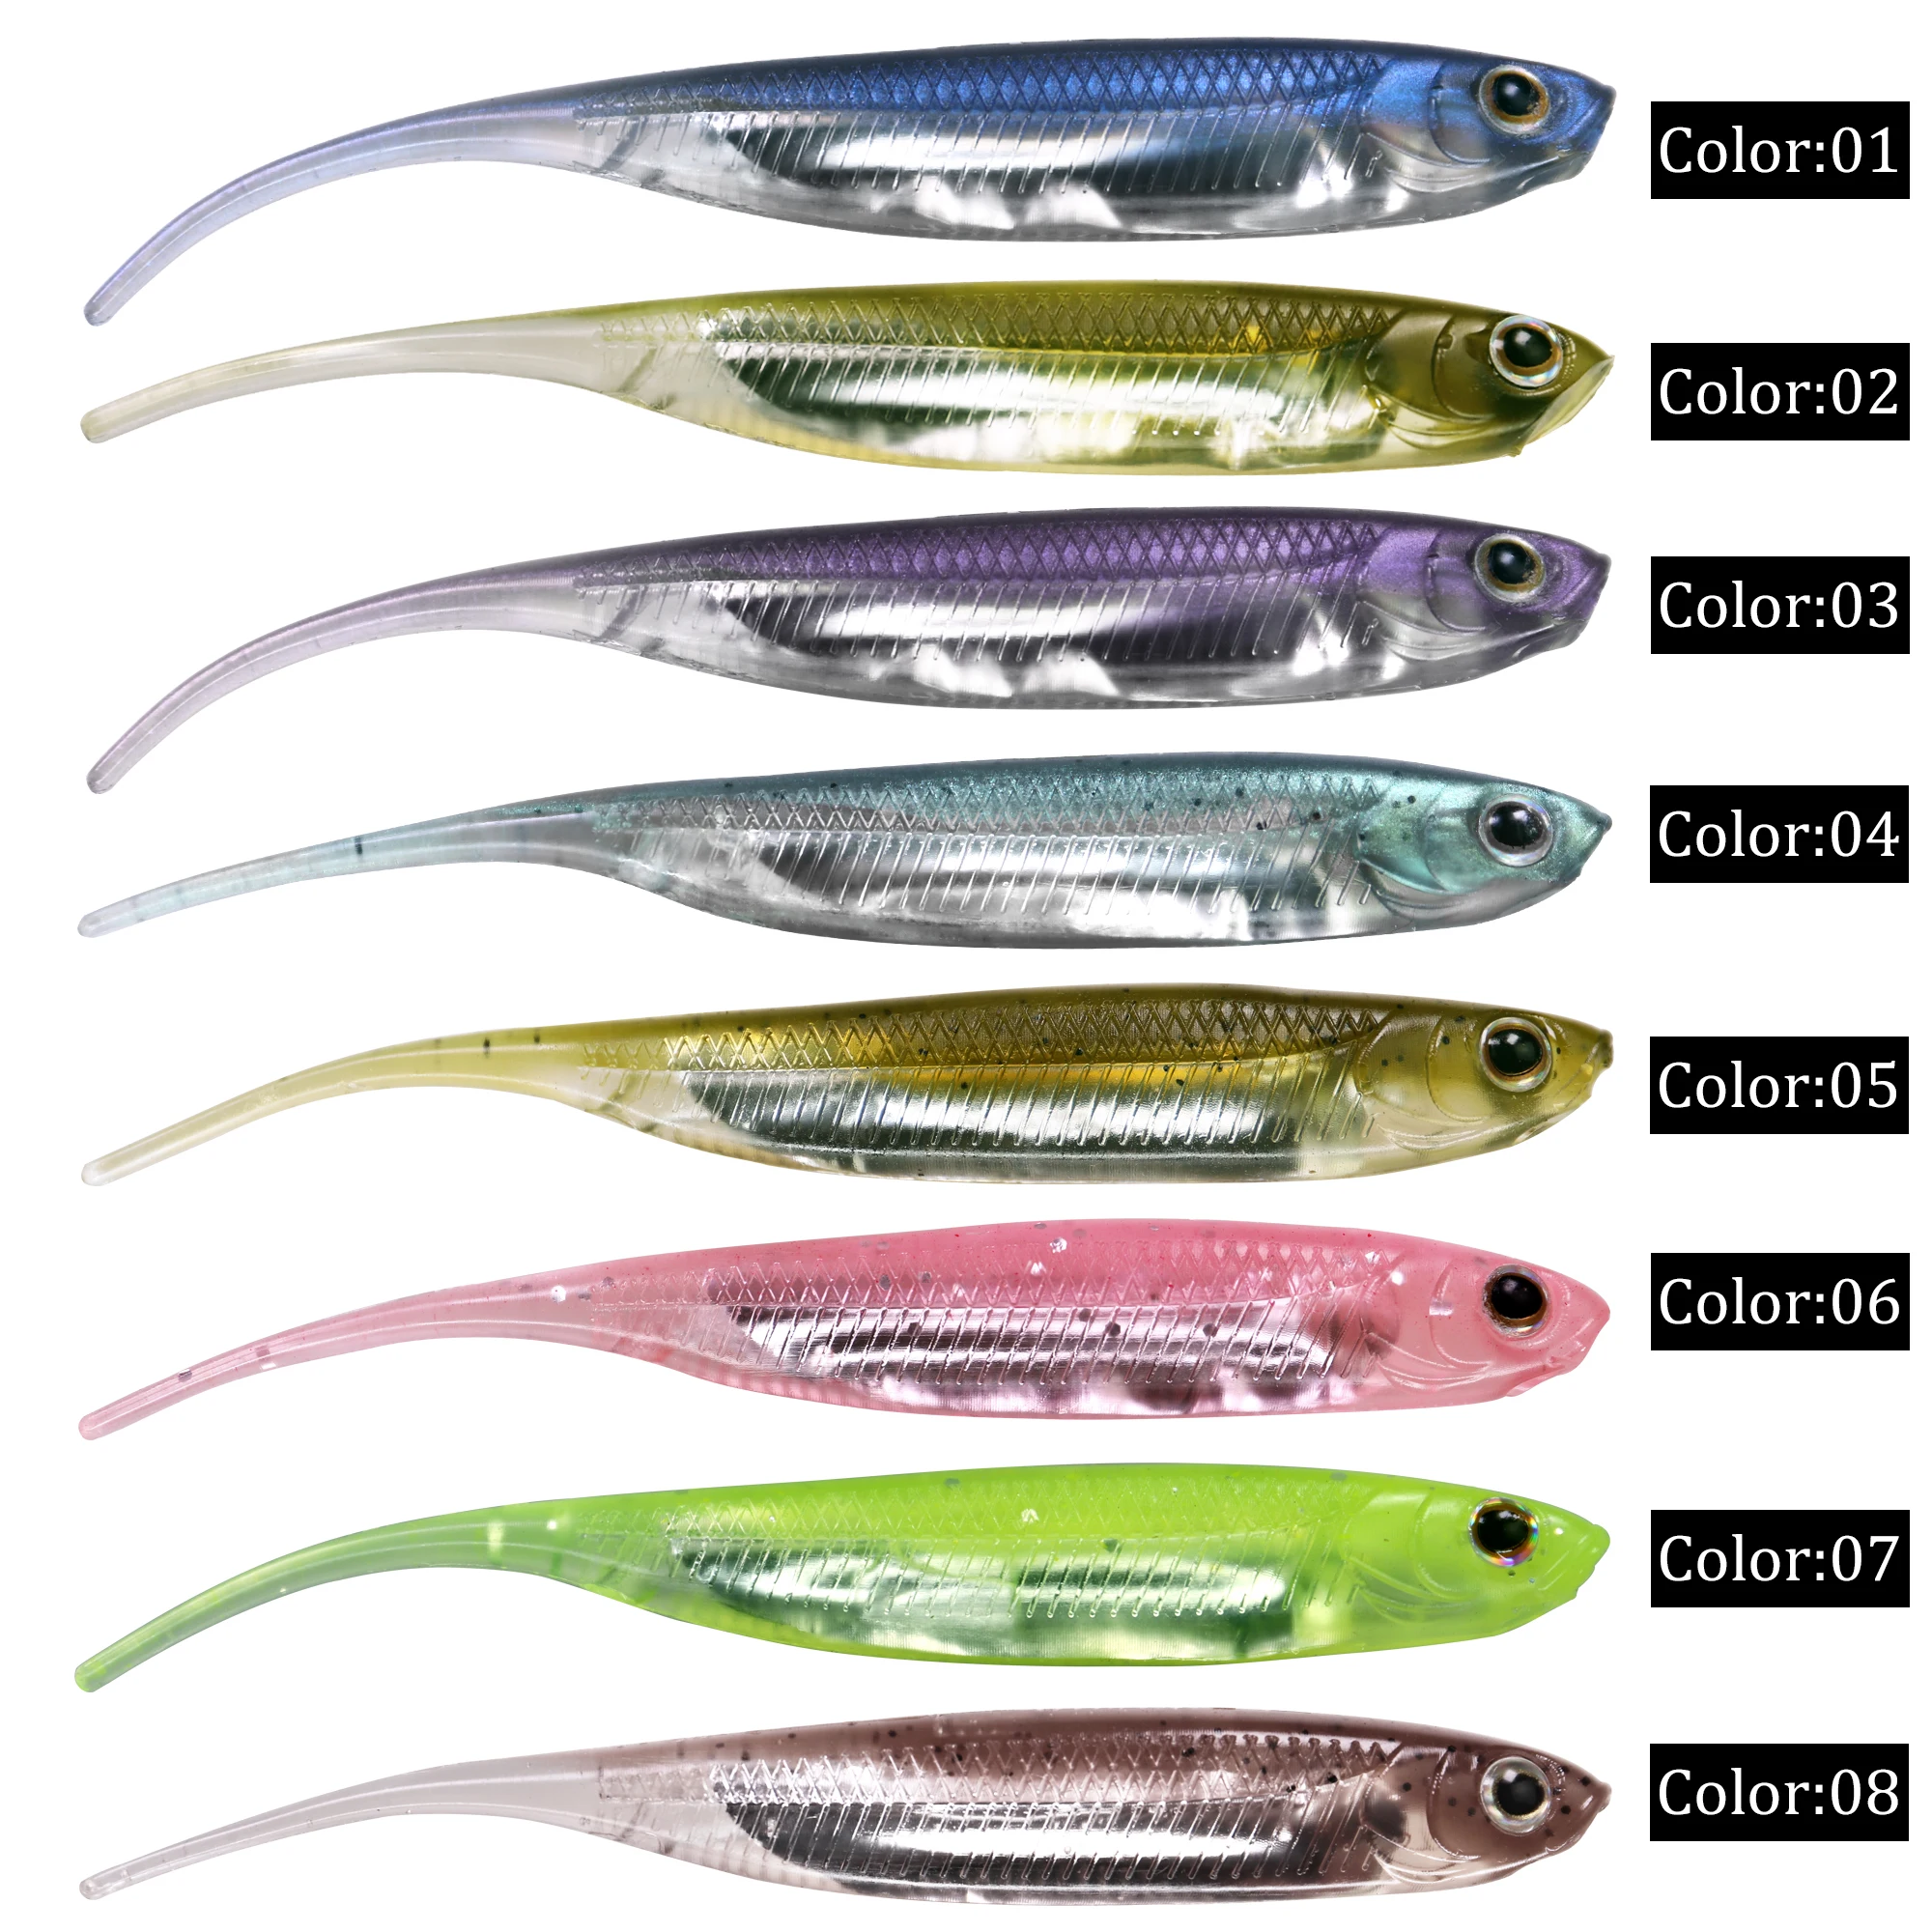 6-pack Resolv Soft Bait For Bass - 8cm Pin Tail Swimbait Silicone